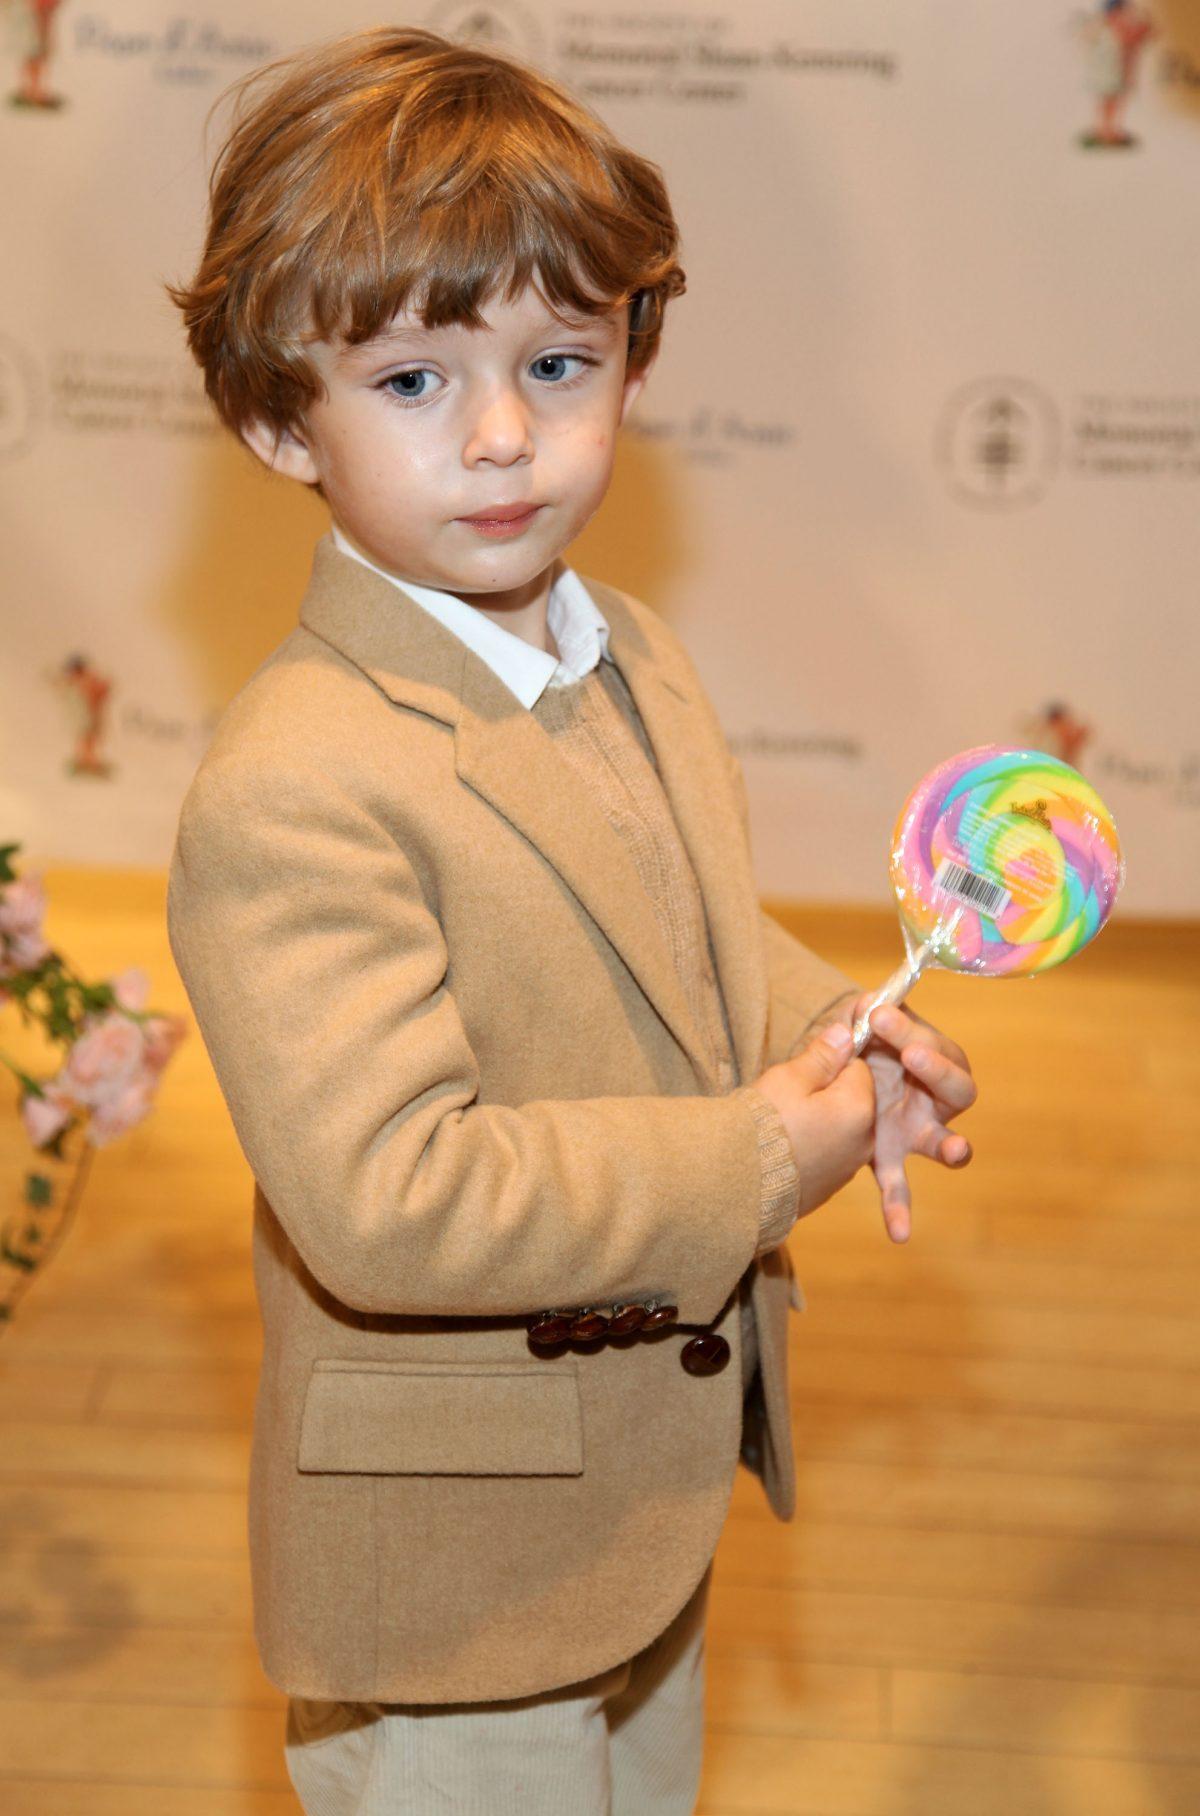 Barron Trump attends the 18th annual Bunny Hop to benefit the Society of Memorial Sloan-Kettering Cancer Center at FAO Schwartz in New York City, on March 3, 2009. (Astrid Stawiarz/Getty Images)